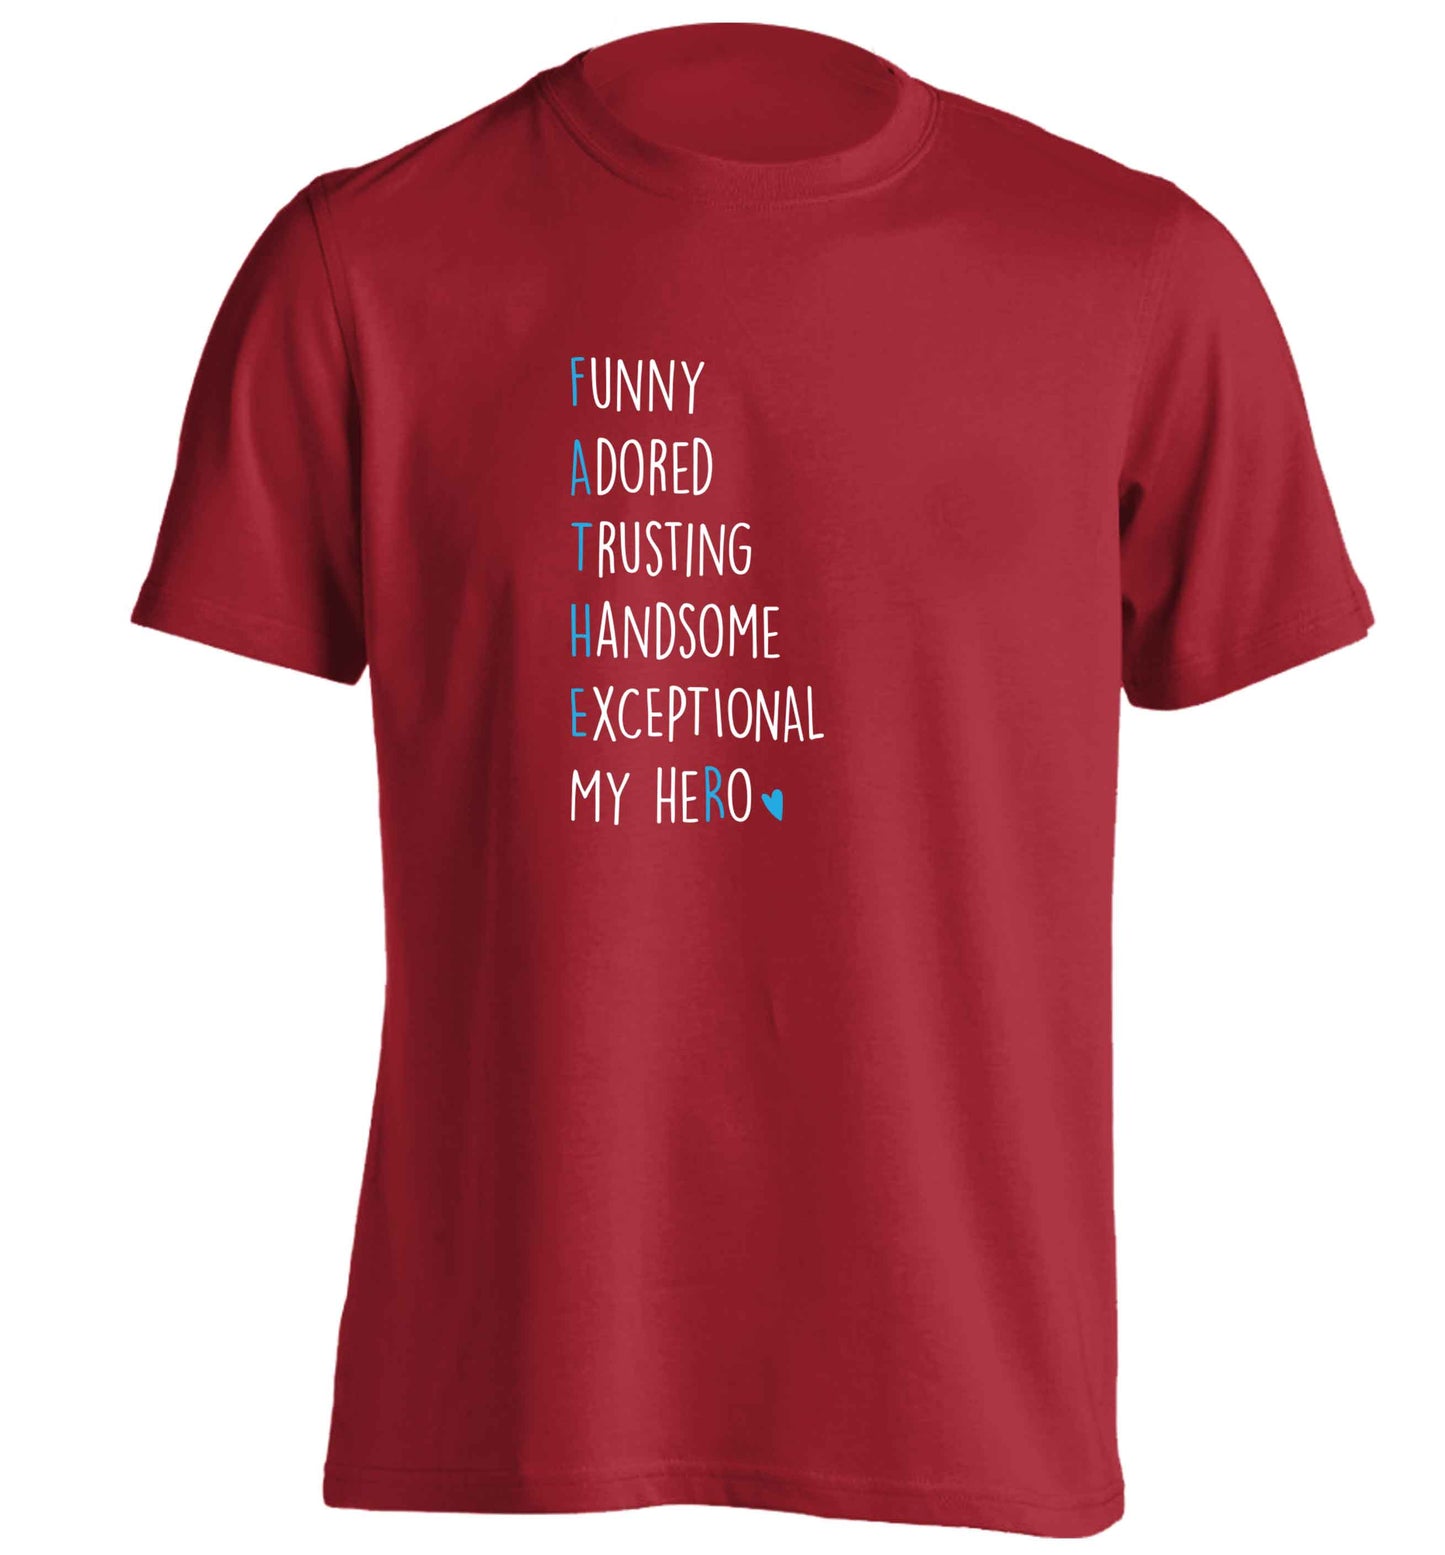 Father, funny adored trusting handsome exceptional my hero adults unisex red Tshirt 2XL